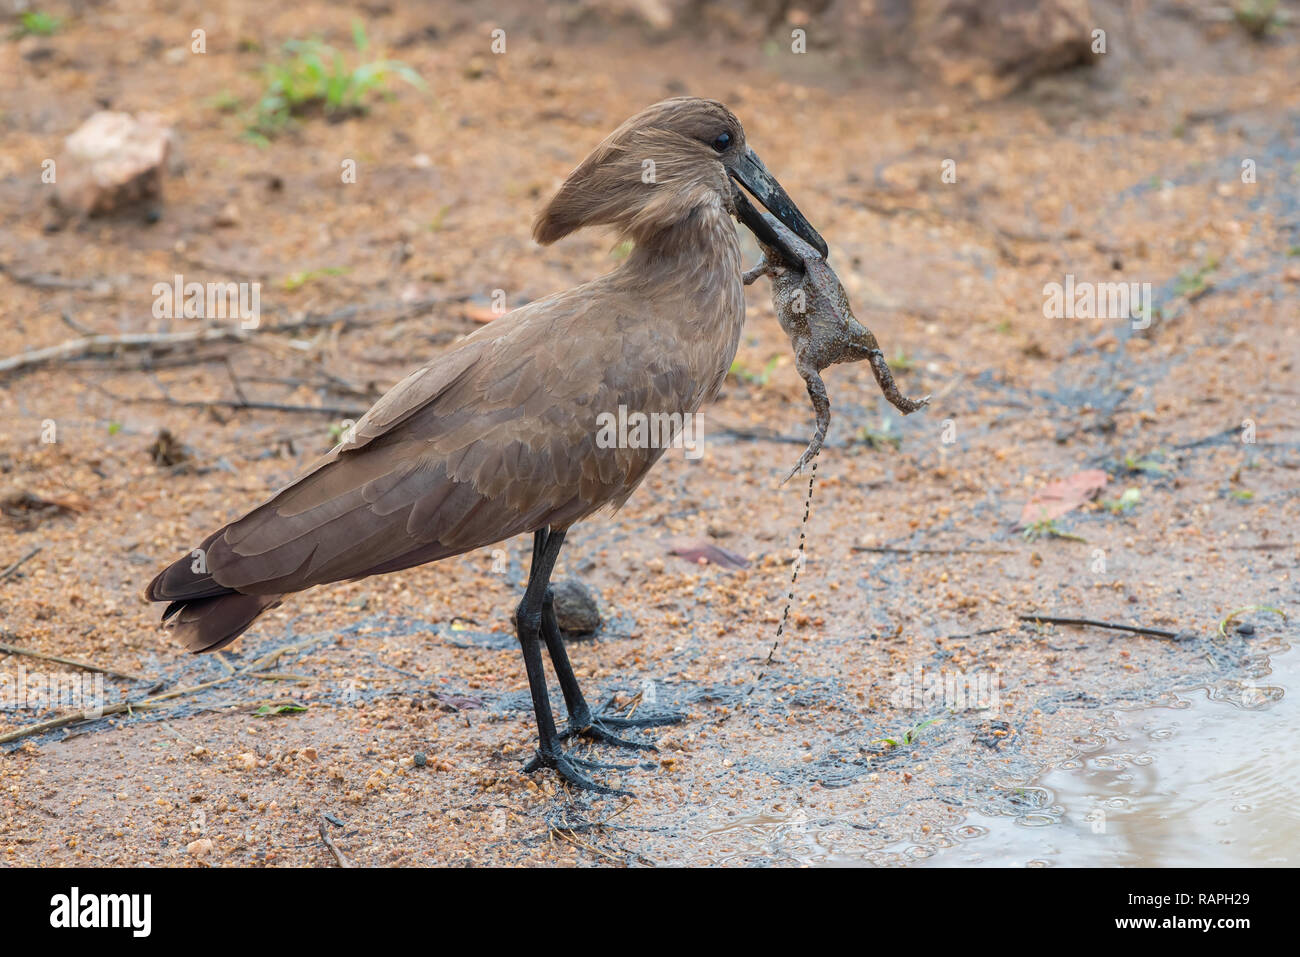 A Hamerkop (Scopus umbretta) catches an Eastern Olive Toad (Amietophrynus germani) in Kruger National Park, South Africa. Stock Photo